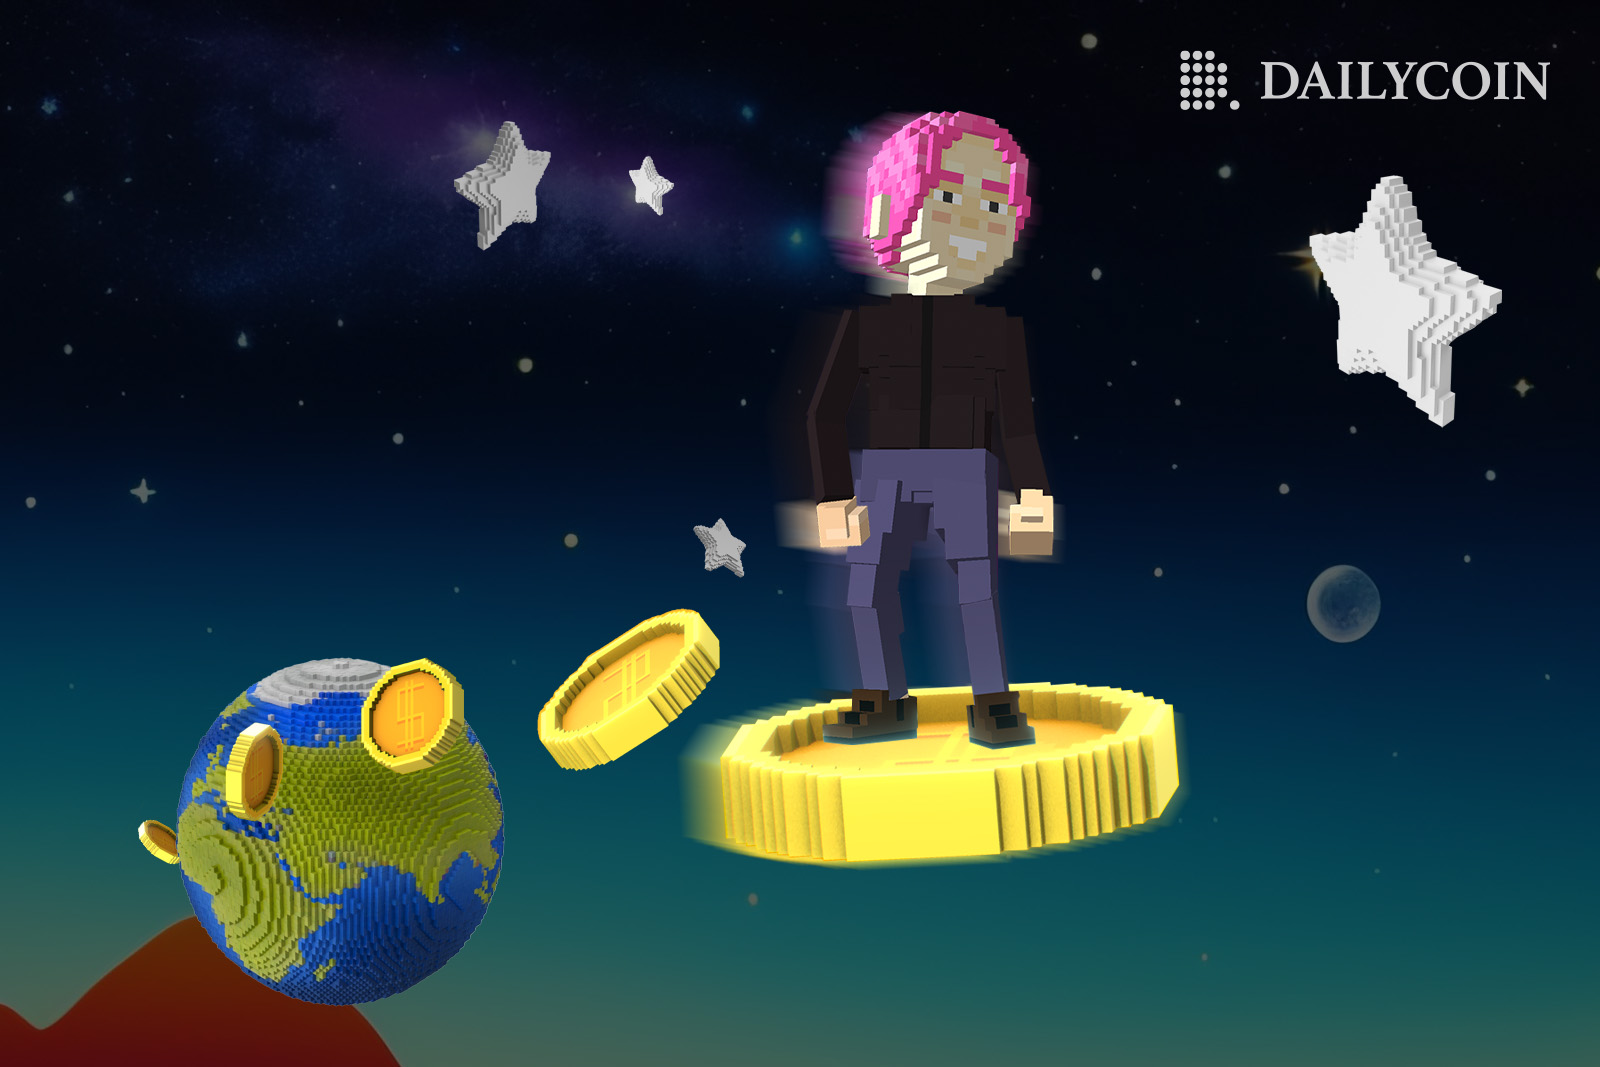 Metaverse avatar riding a crypto coin in outer space.